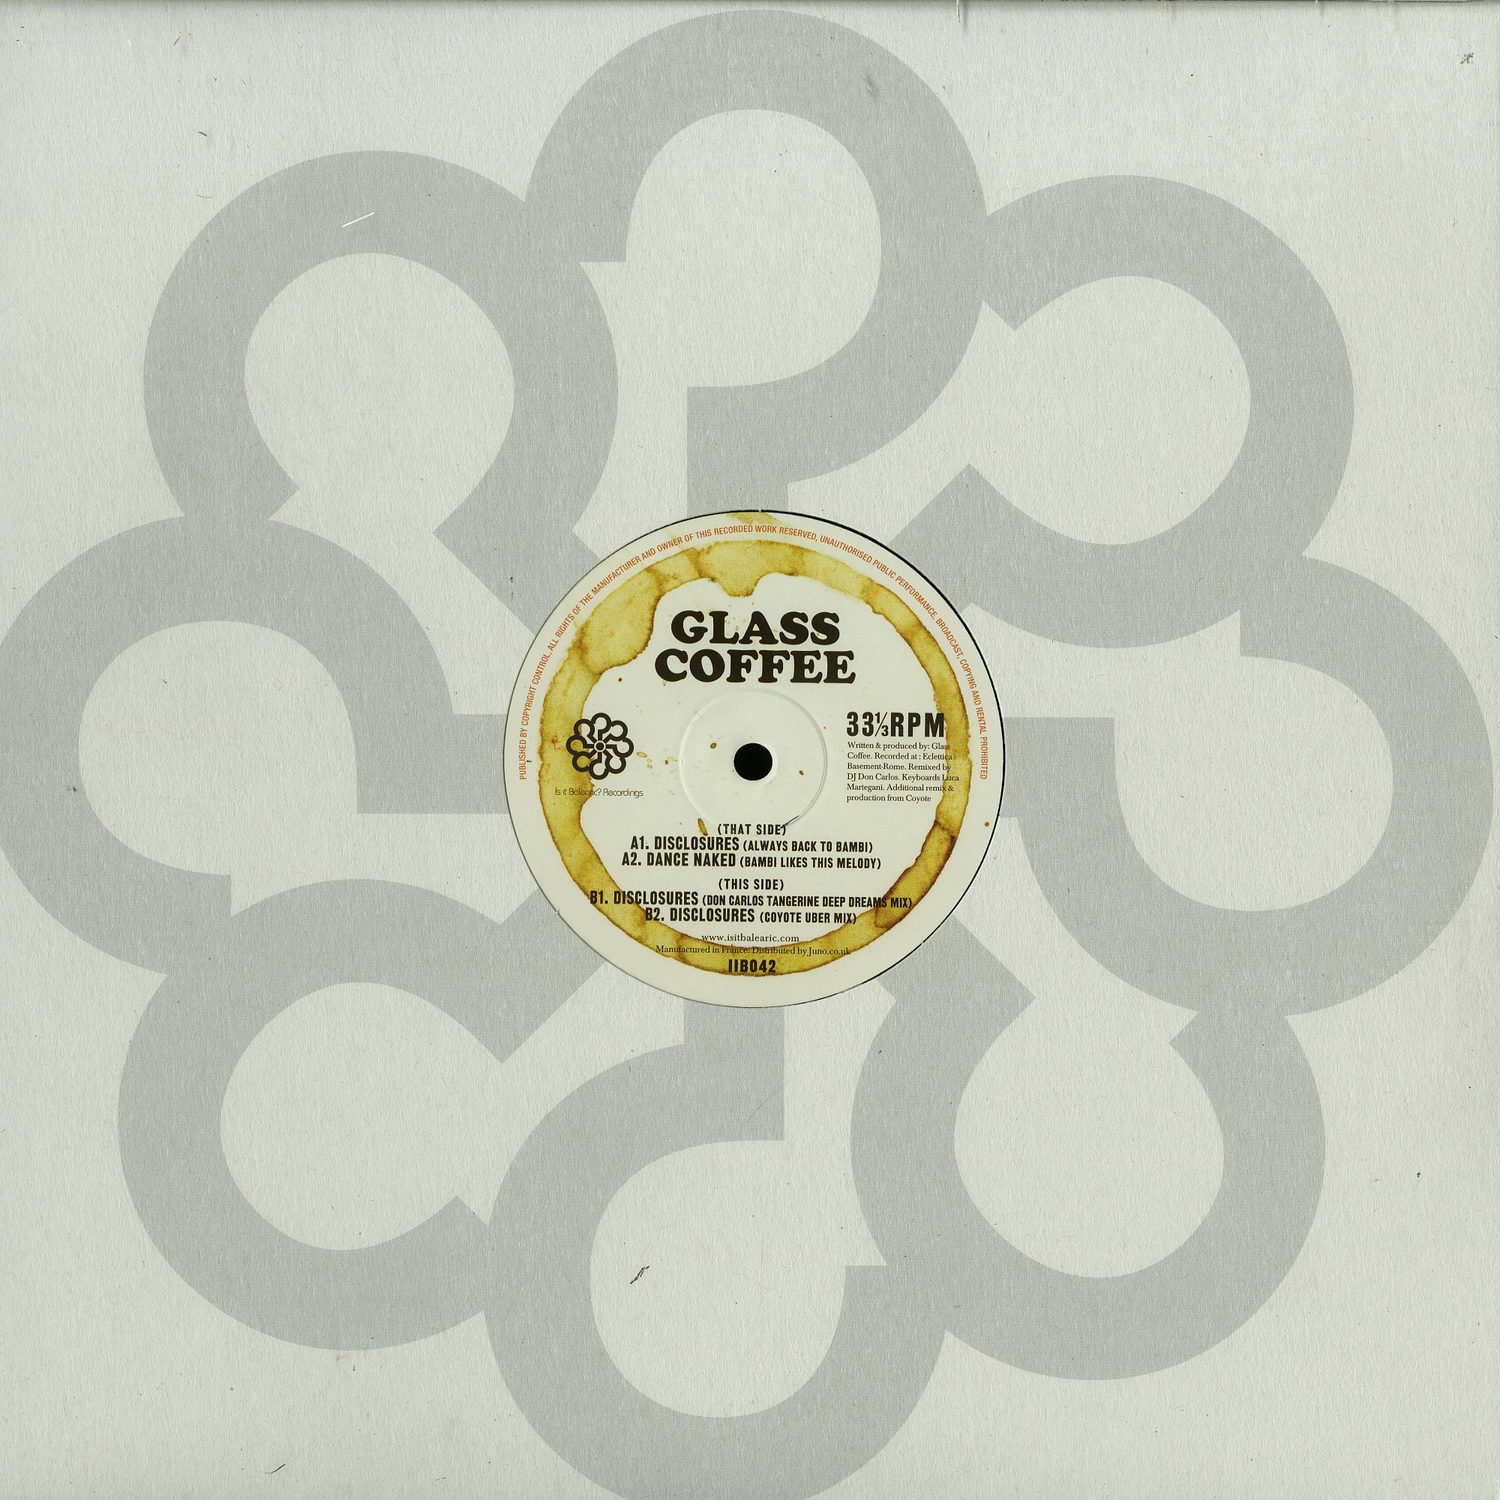 Glass Coffee - DISCLOSURES